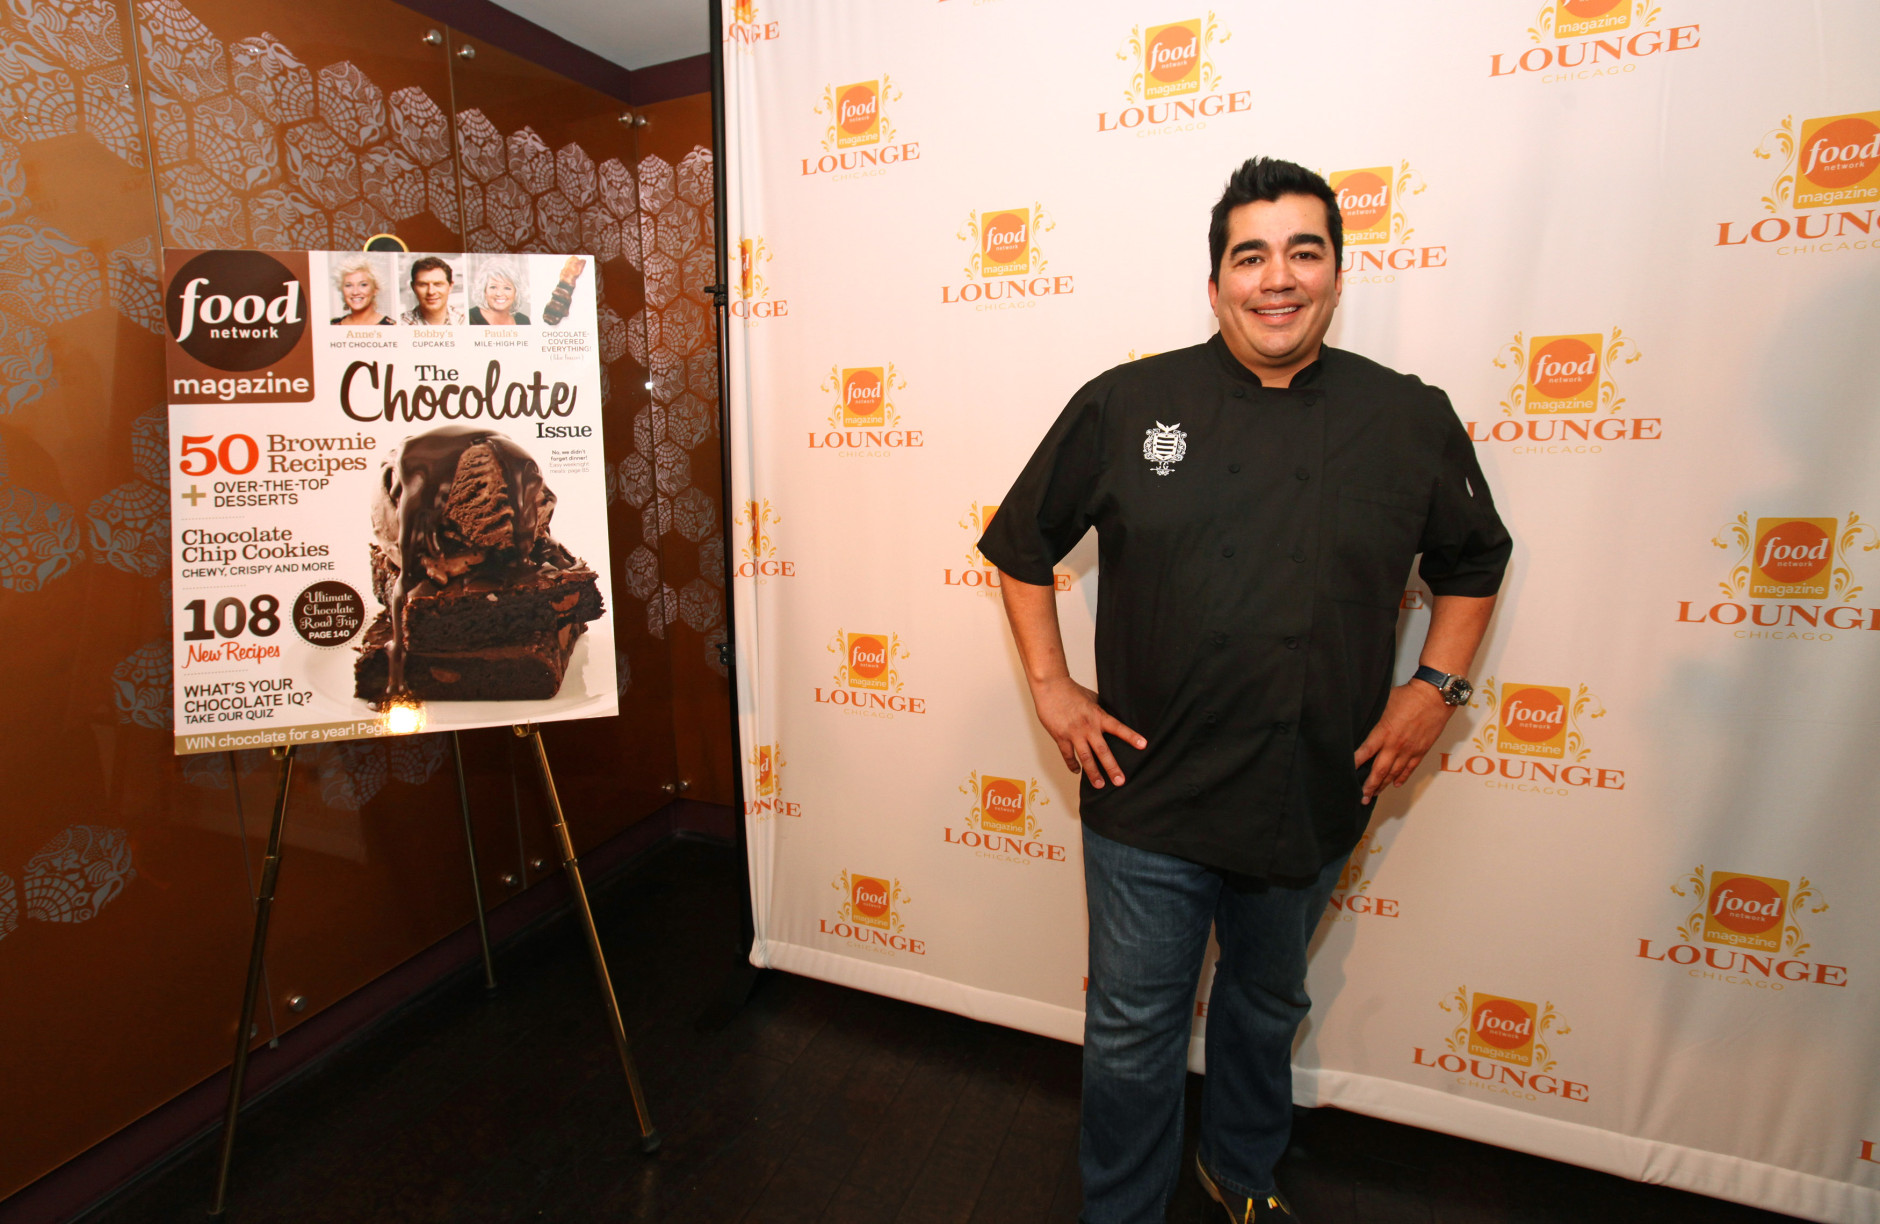 CHICAGO, IL - MARCH 06: American Chef Jose Garces attends Food Network Magazine Chicago Lounge at Mercat a la Planxa in the Blackstone Hotel on March 6, 2012 in Chicago, Illinois. (Photo by Barry Brecheisen/Getty Images for Hearst)